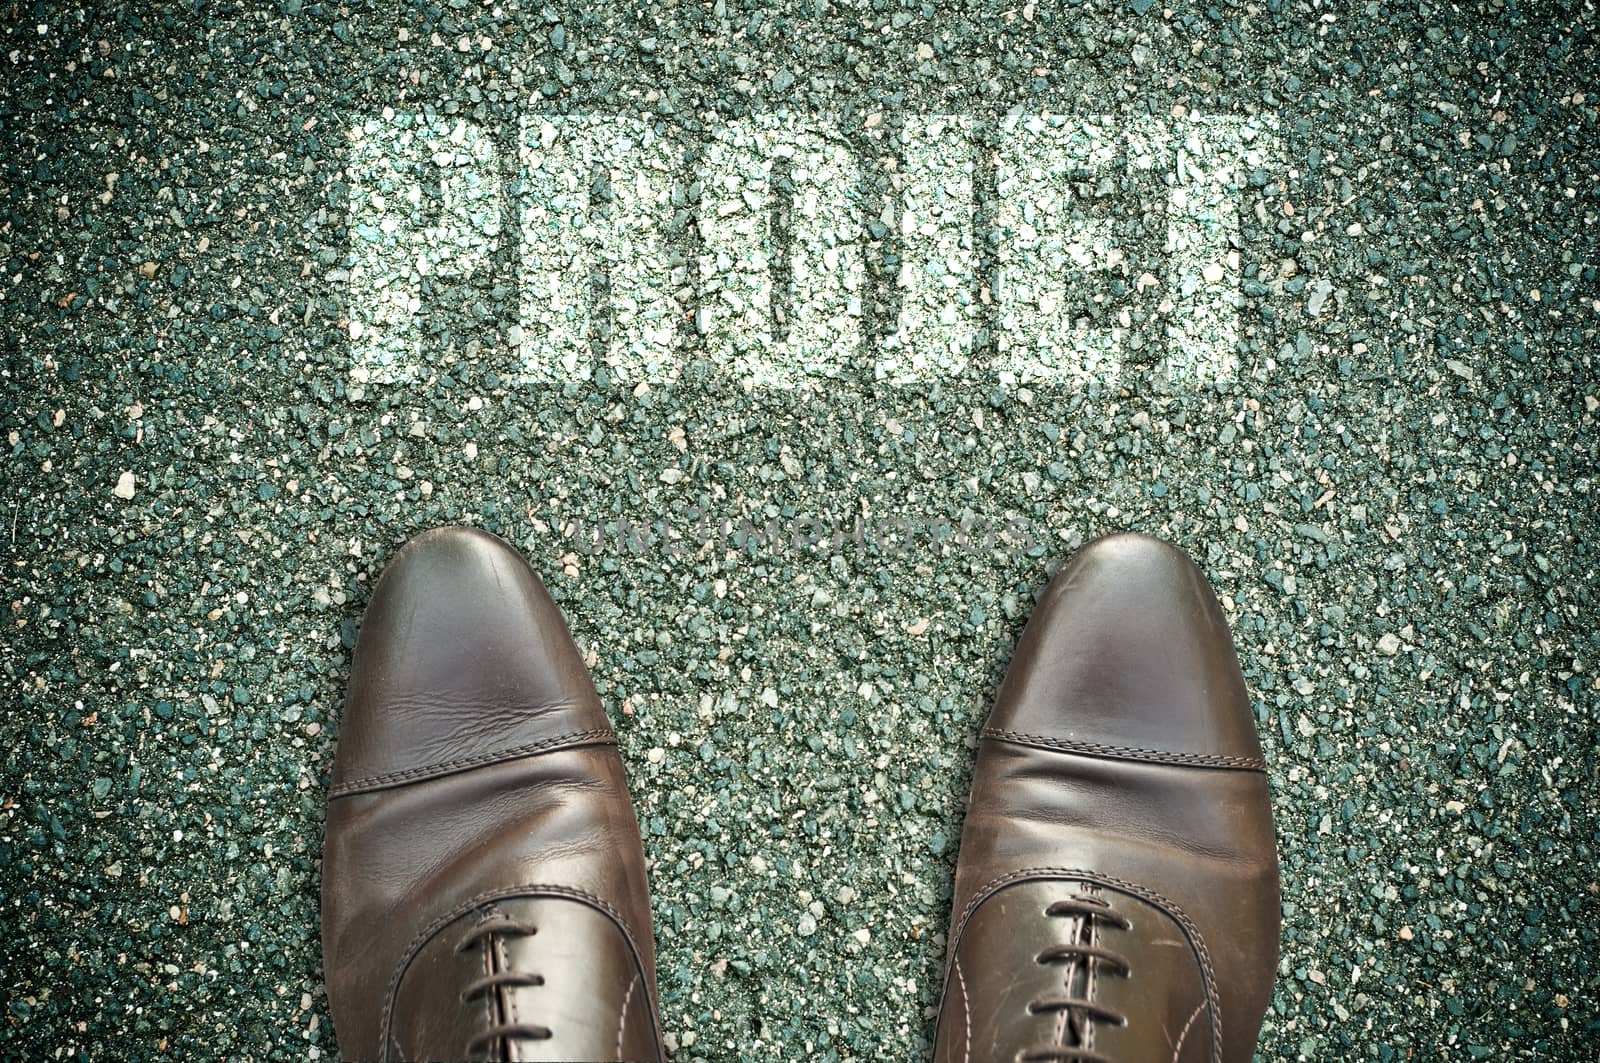 concept message on the road with feet - projet